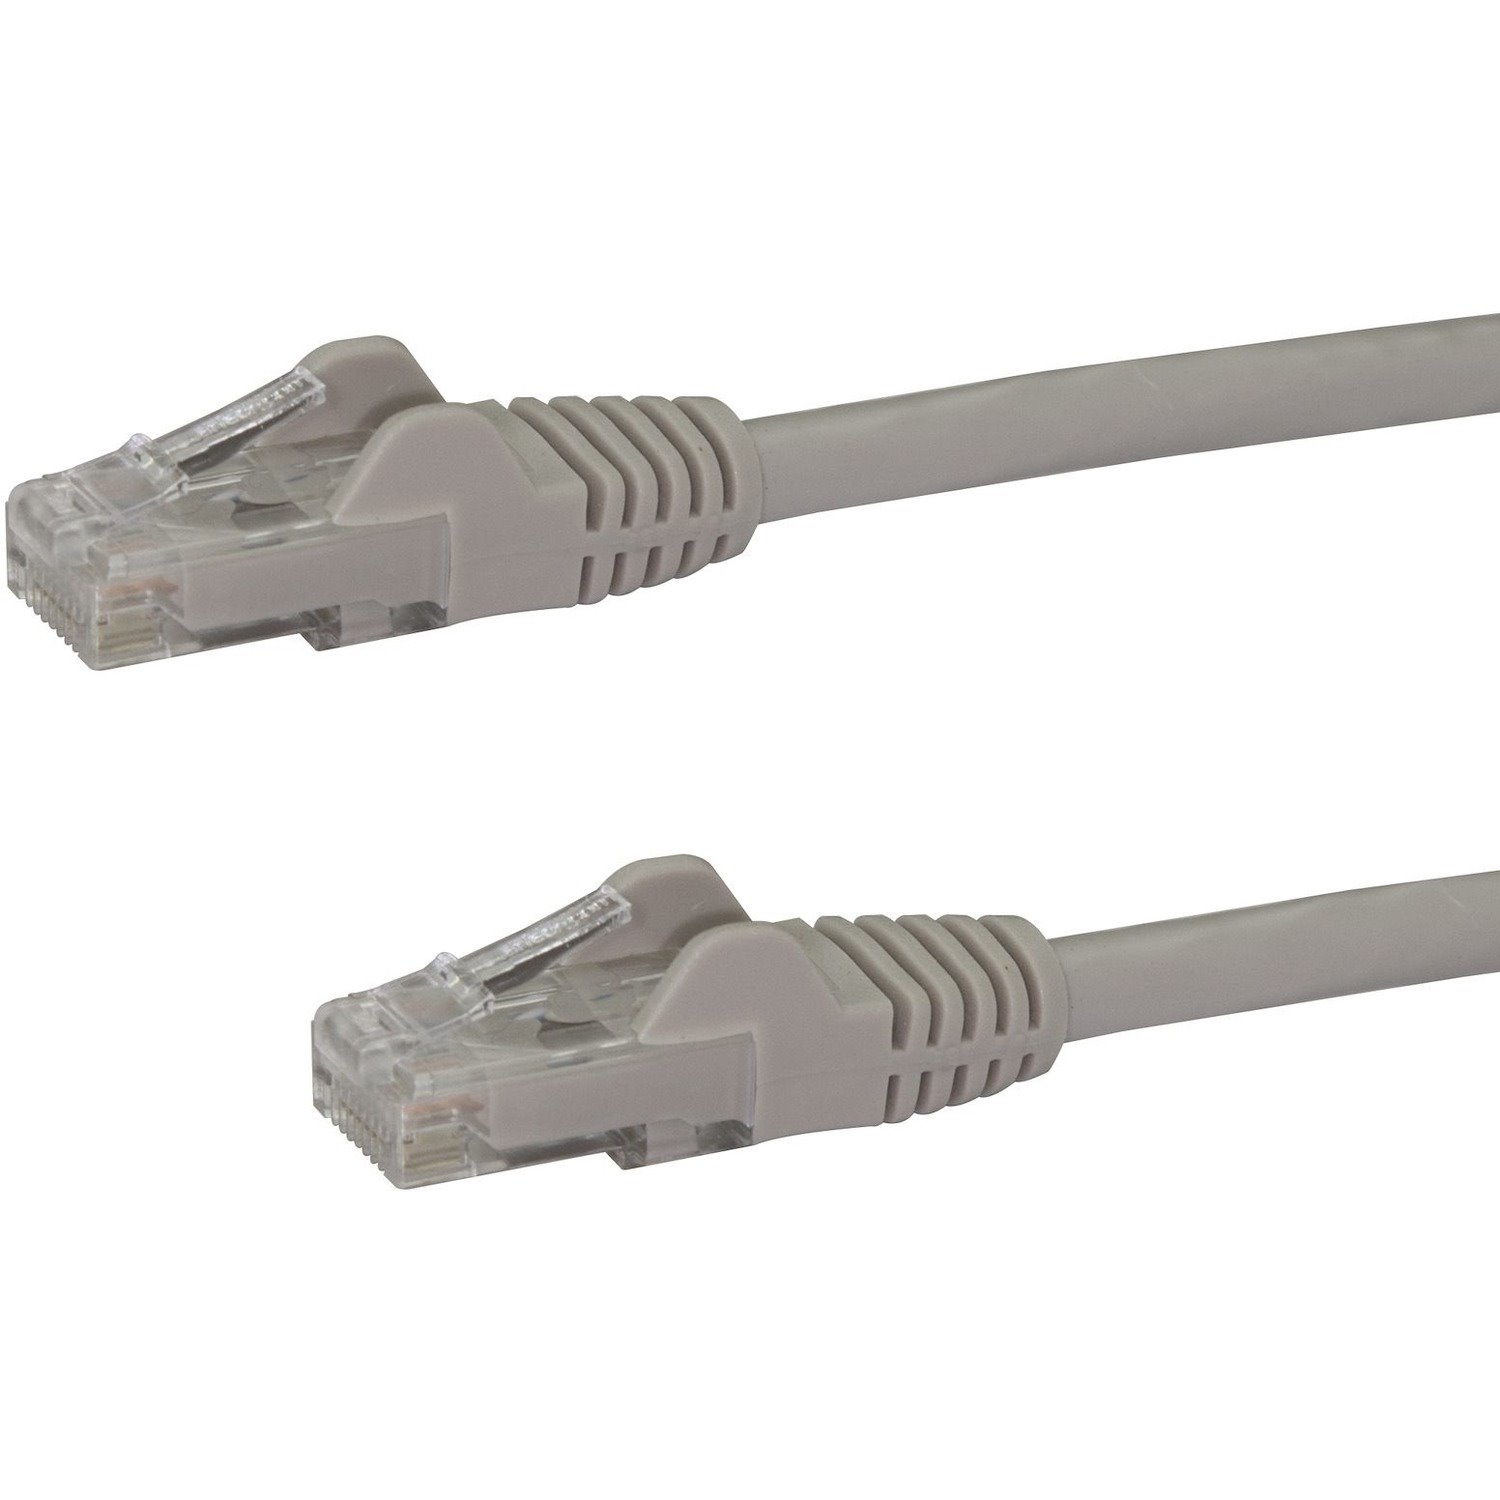 StarTech.com 35ft CAT6 Ethernet Cable - Gray Snagless Gigabit - 100W PoE UTP 650MHz Category 6 Patch Cord UL Certified Wiring/TIA